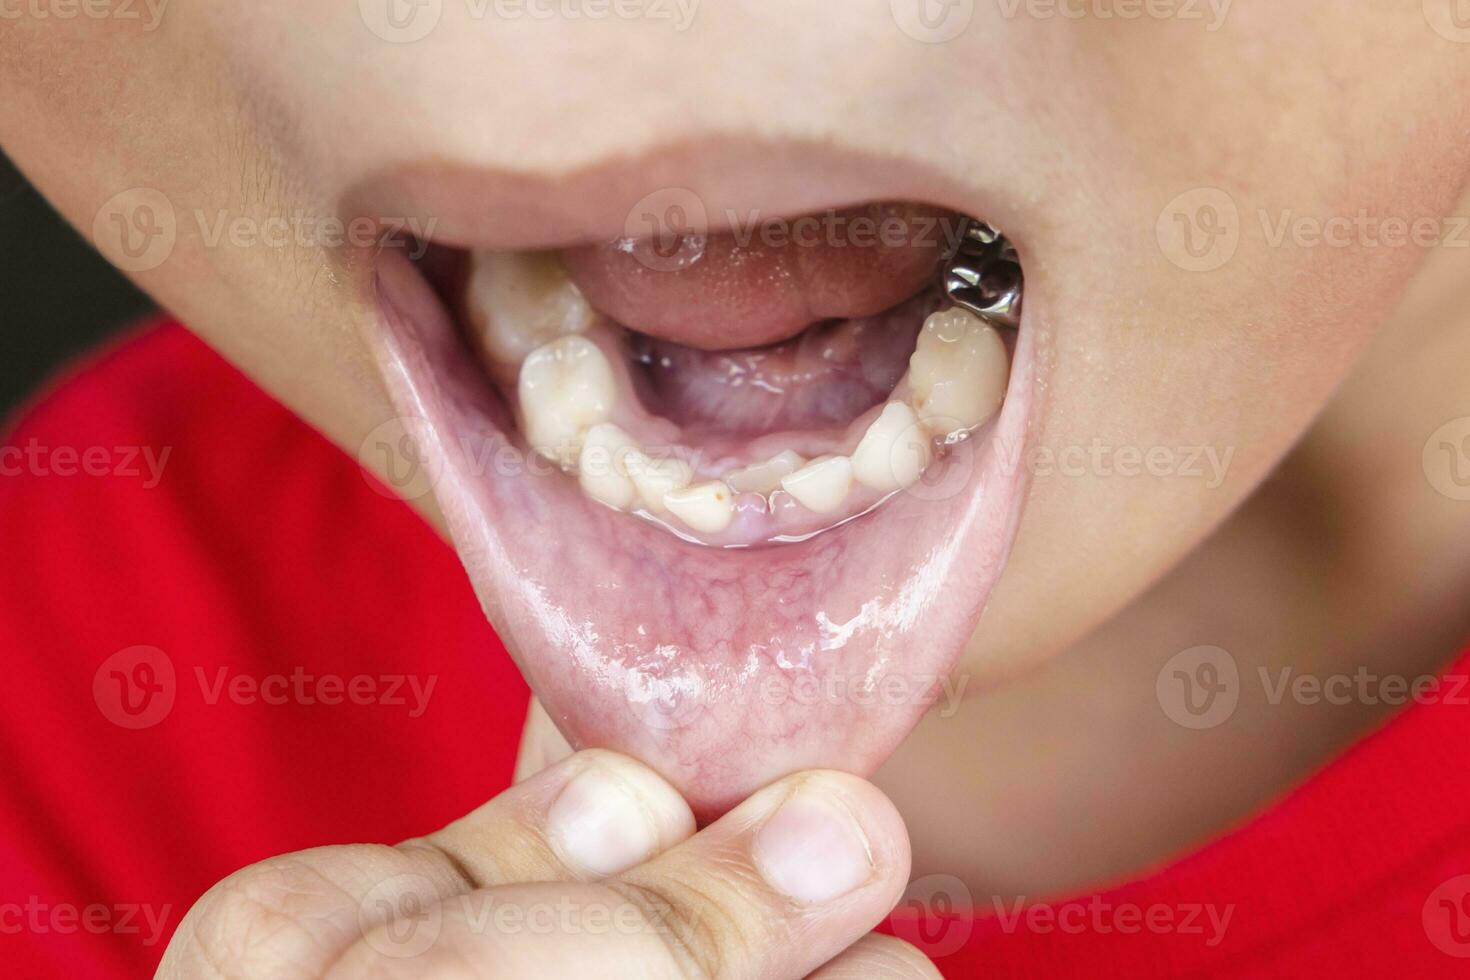 Child milk teeth fall out from gum. little boy permanent tooth grows in mouth. Cute kid open her mouth show teeth and gums. Concept of health, dentist, hygiene, medical, Healthy teeth, dental clinic. photo